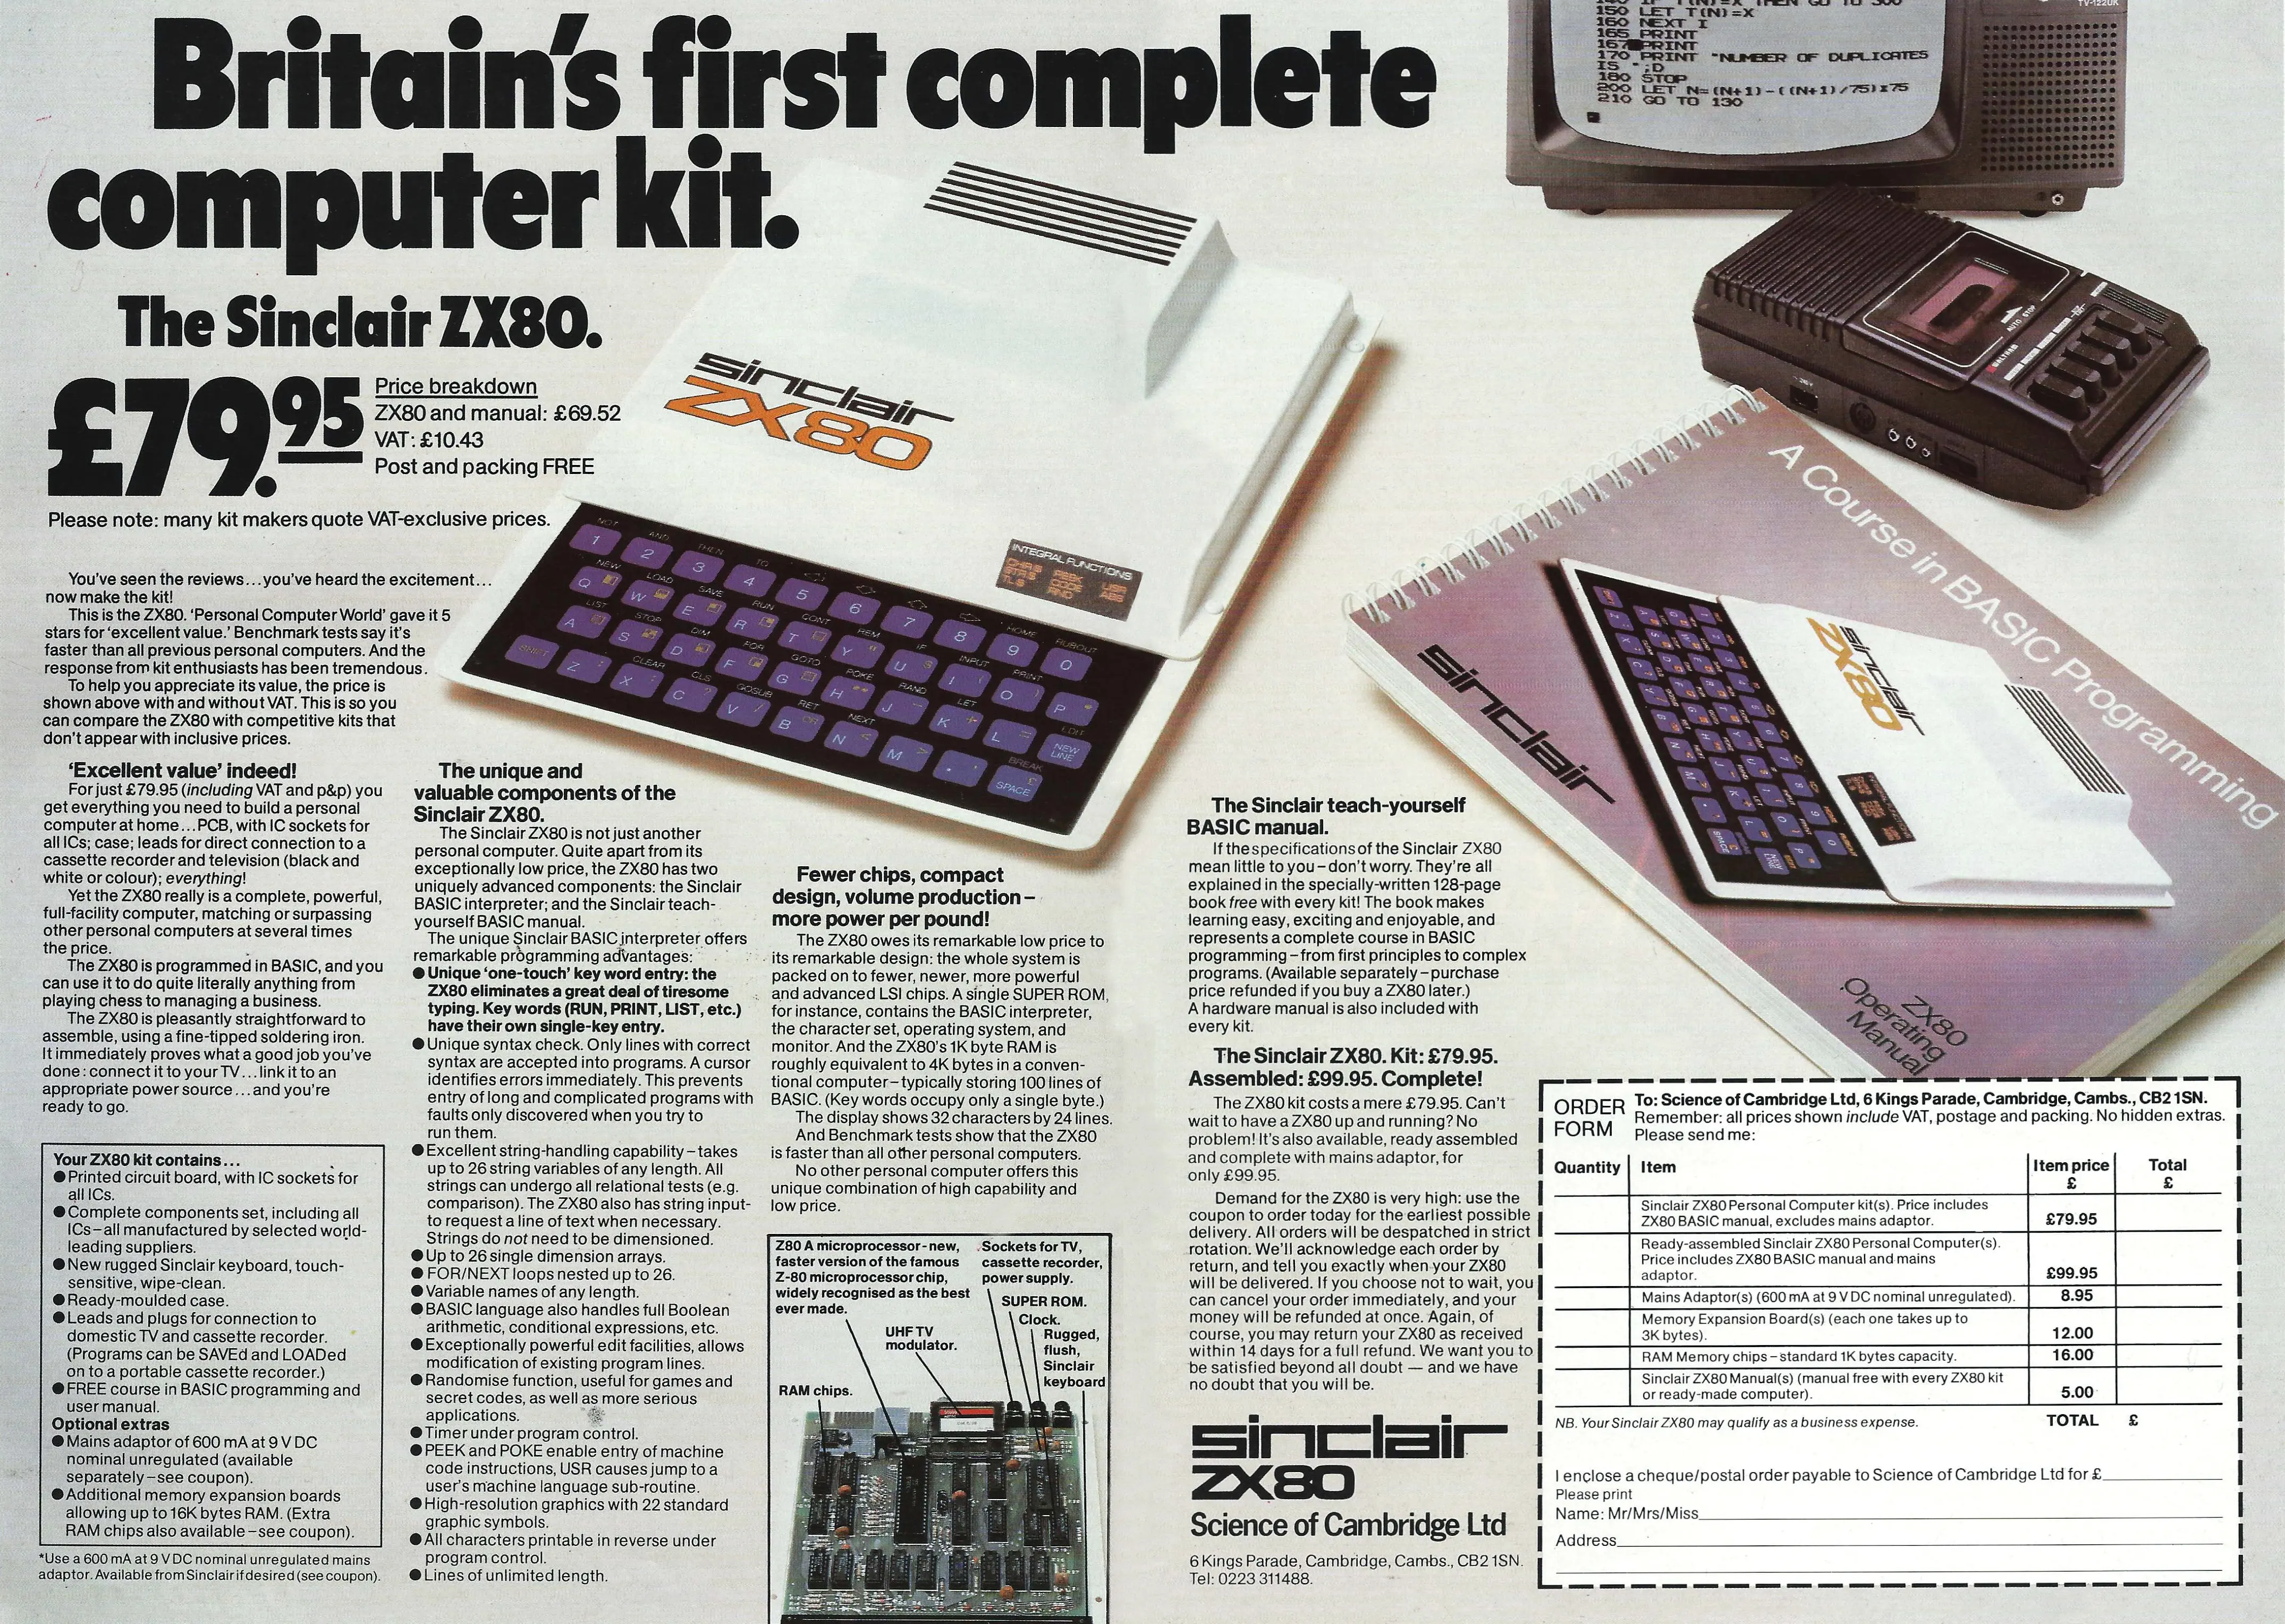 Sinclair Advert: Britain's first complete computer kit - Sinclair ZX-80, from Personal Computer World, October 1980